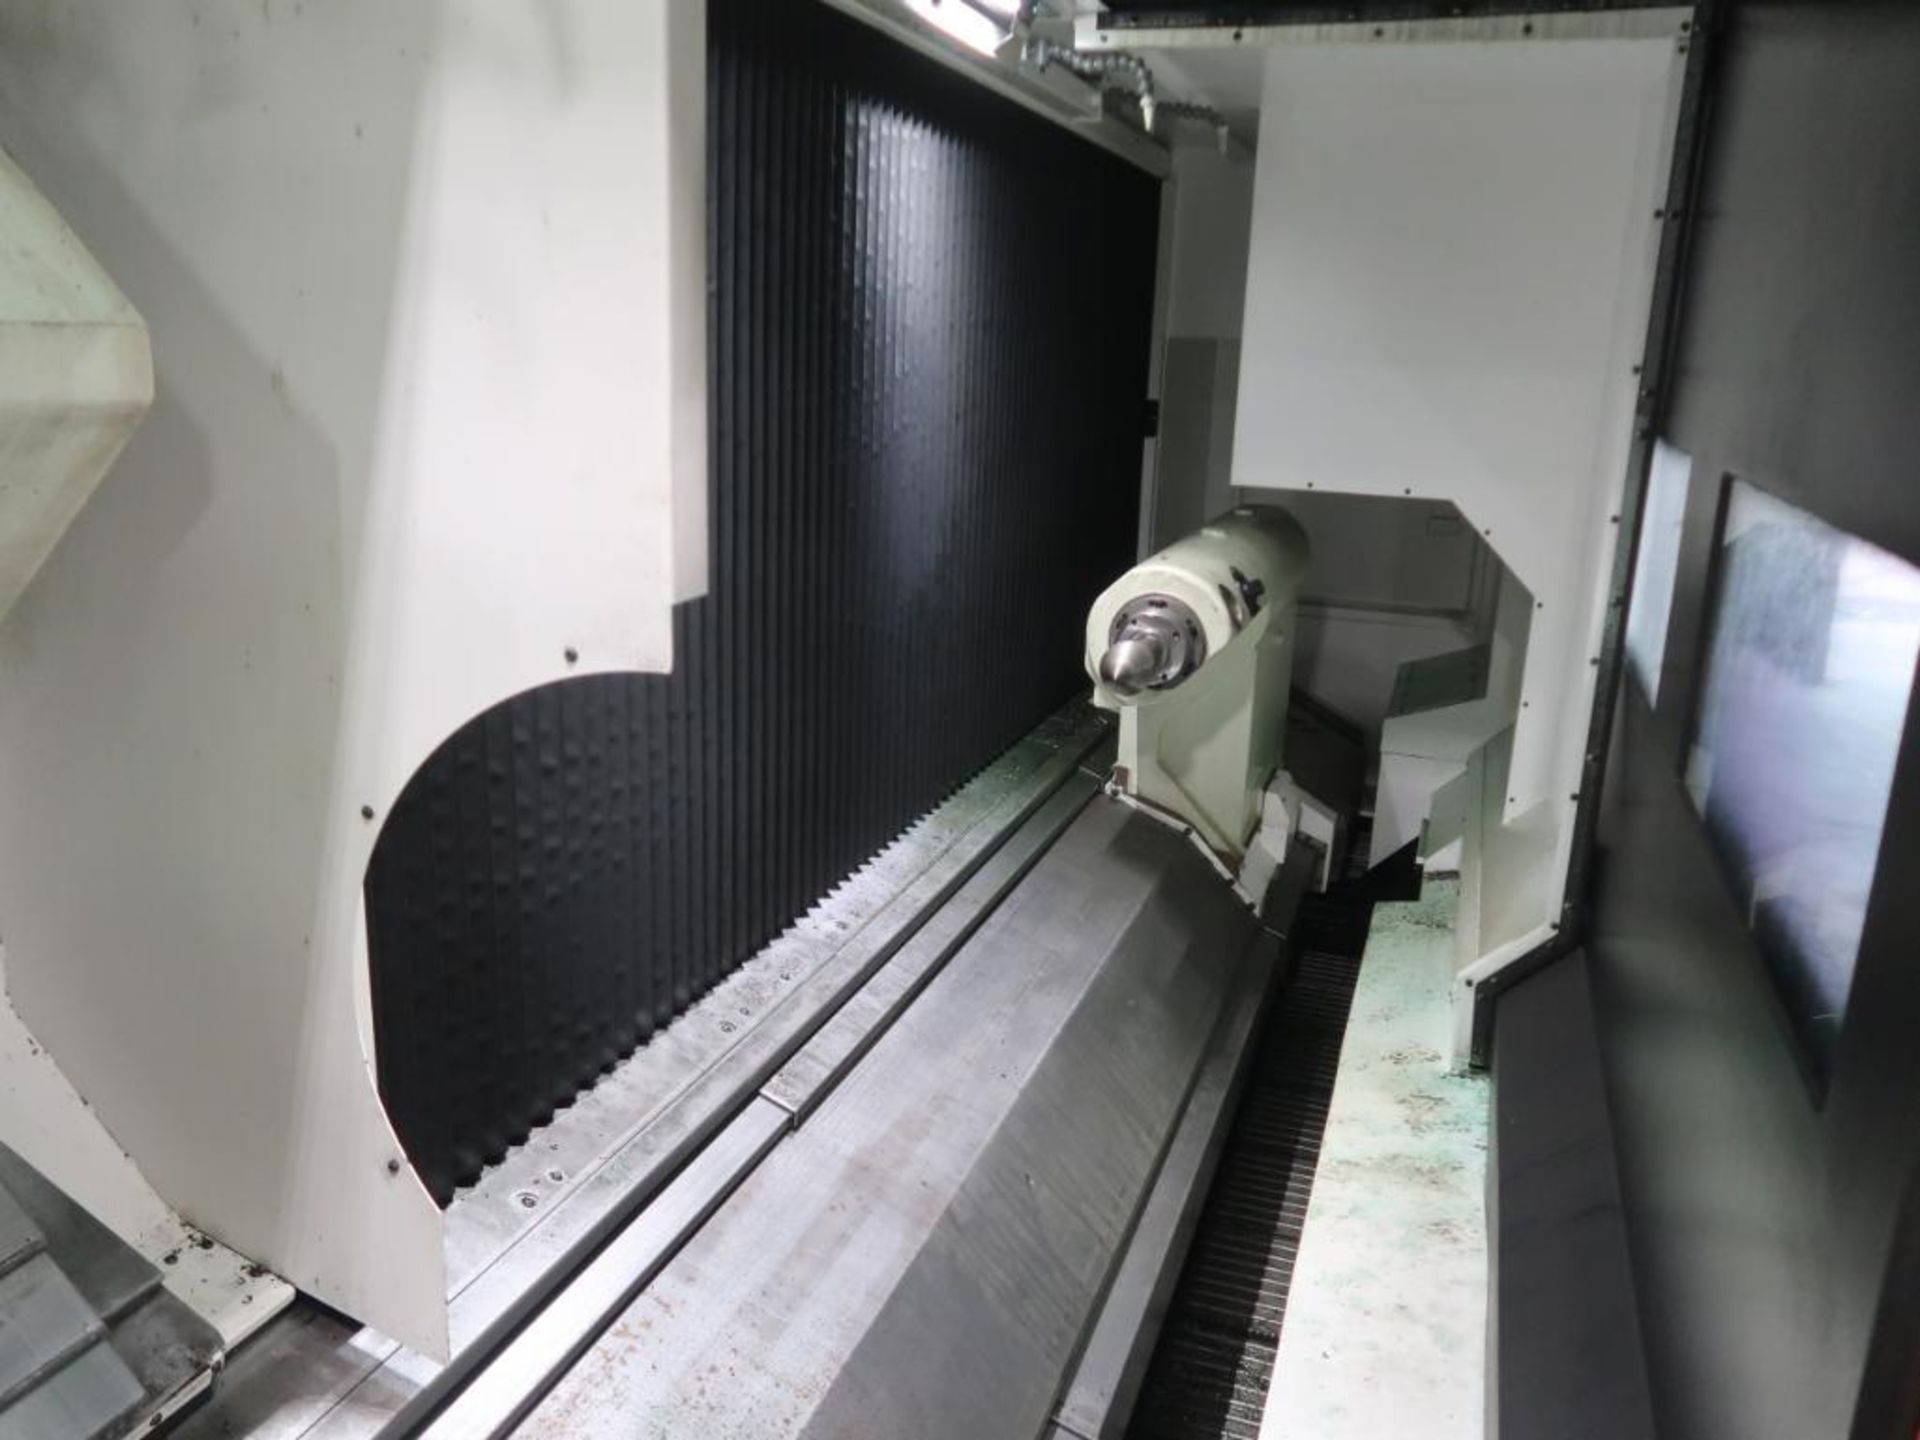 Mazak Smooth Technology 33 in. x 83 in. CNC Turning Center Model Quick Turn 450MY, S/N 296661 (2019) - Image 6 of 13